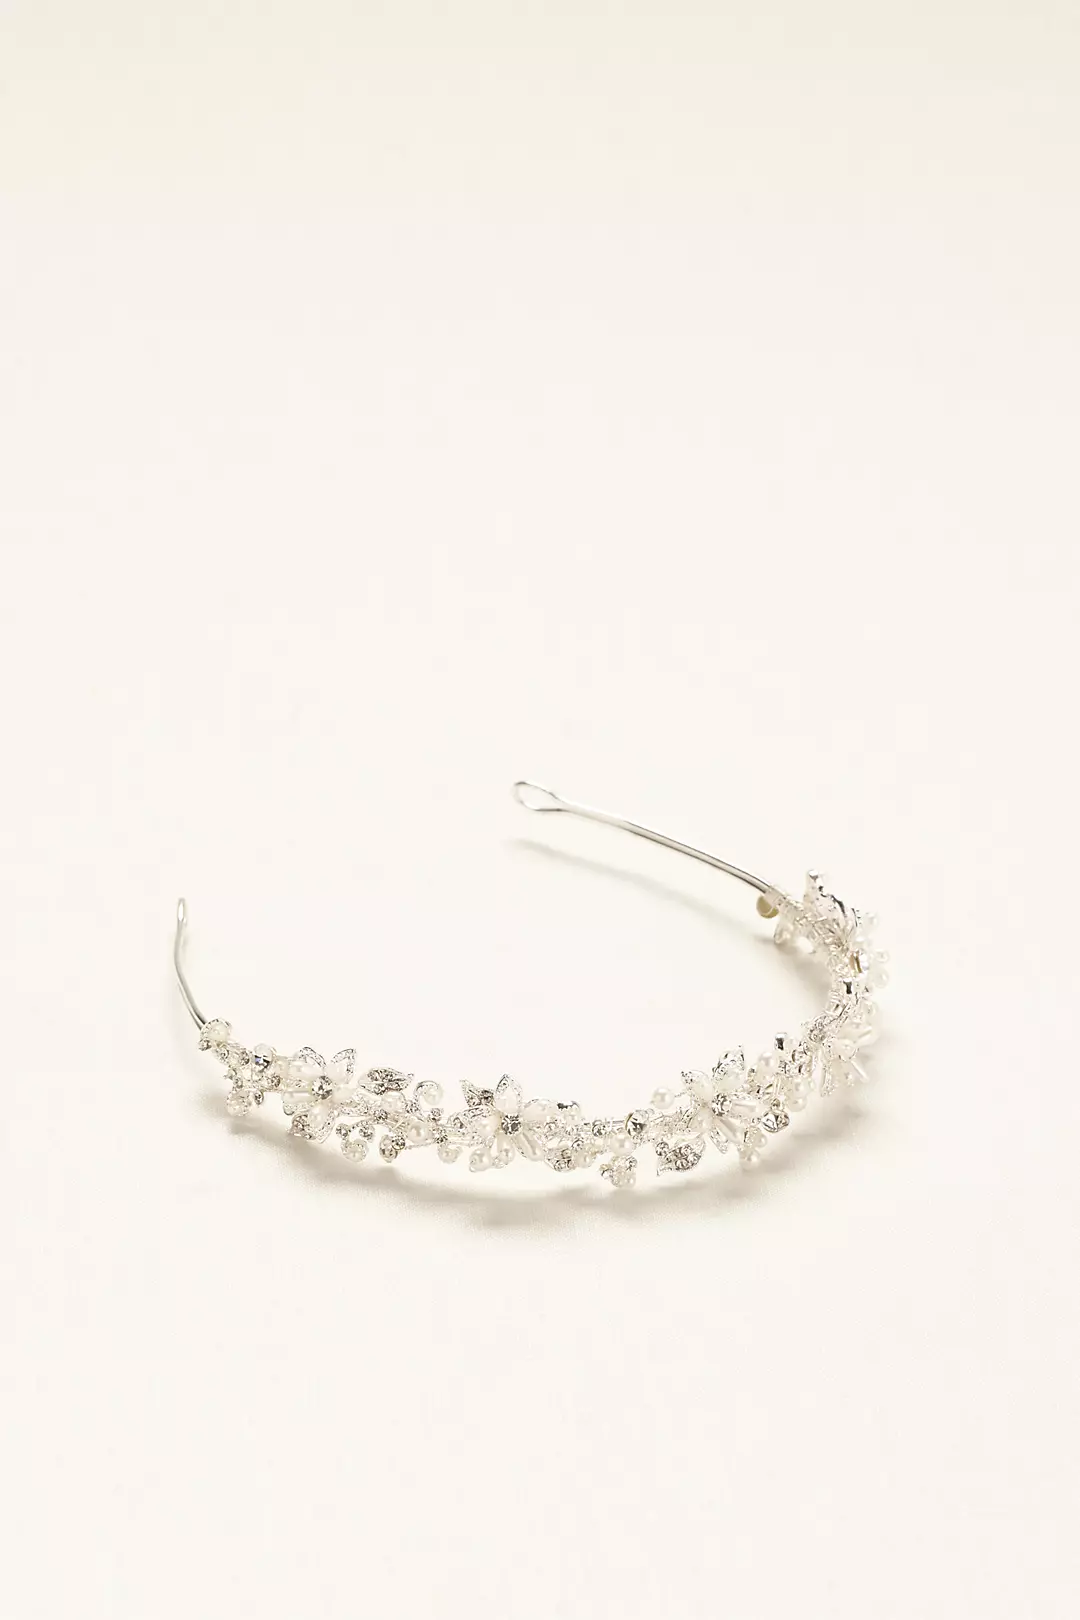 Bridal Headband with Crystals and Pearl Flowers Image 3